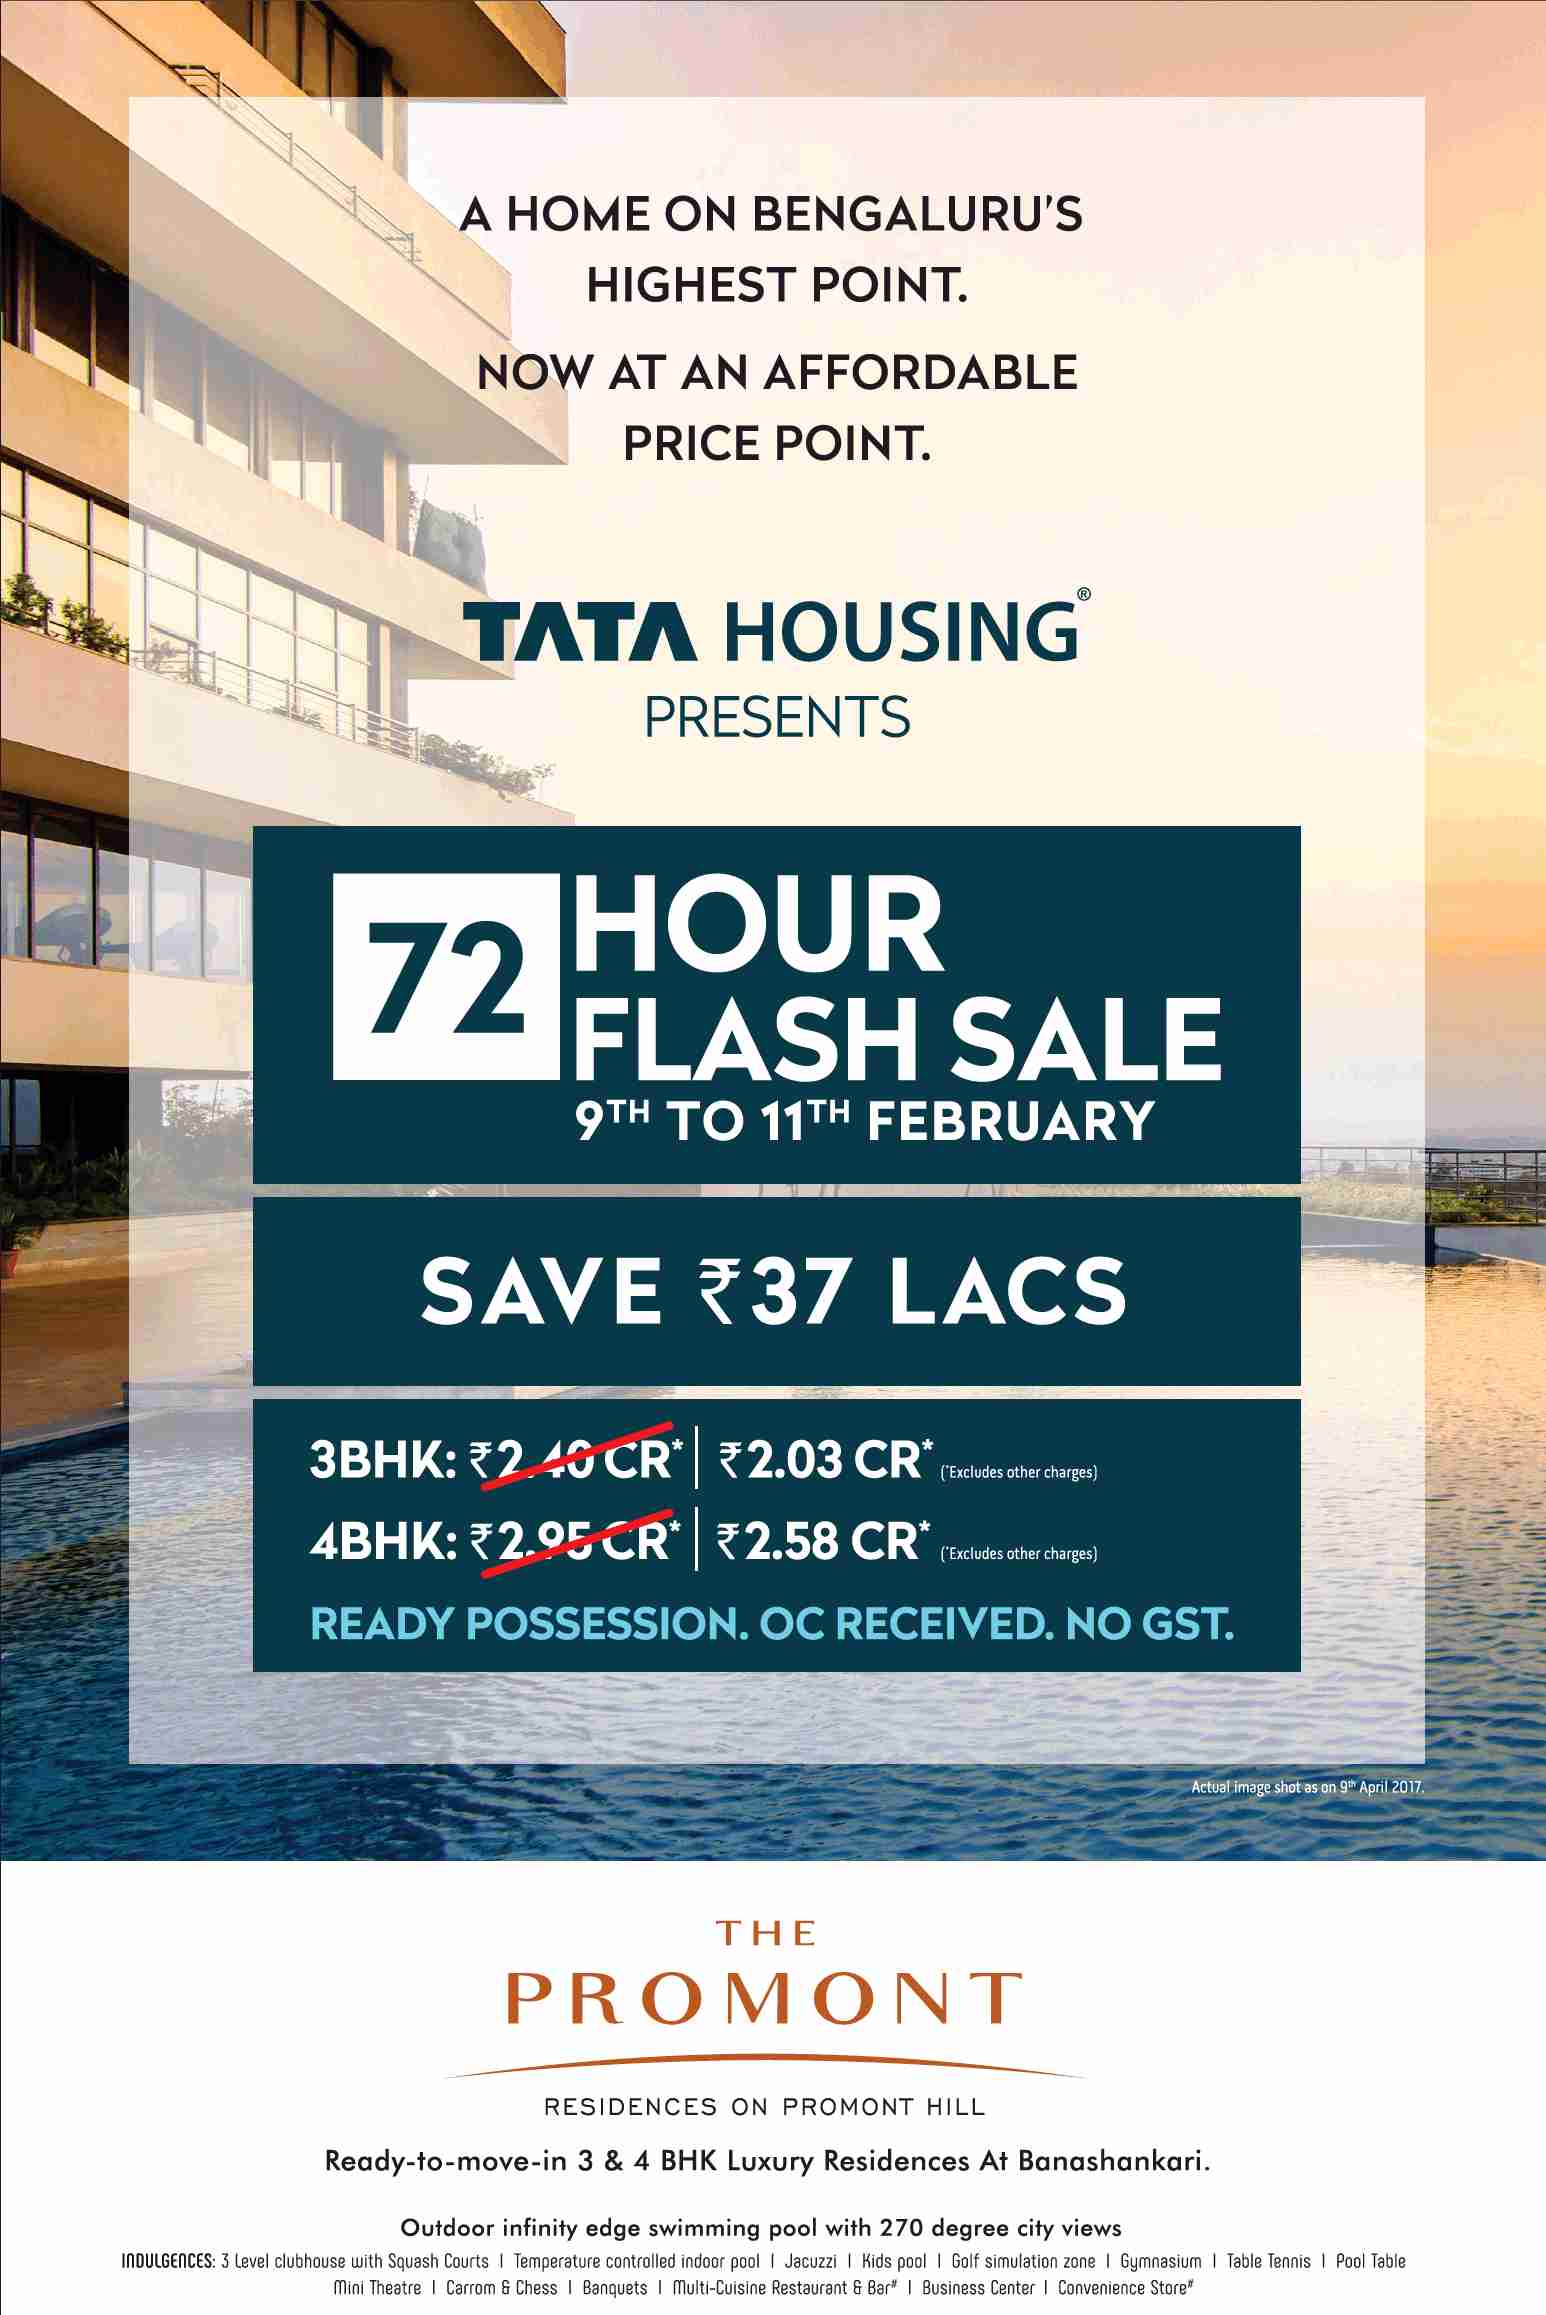 Reside in ready possession homes with no GST at Tata The Promont in Bangalore Update